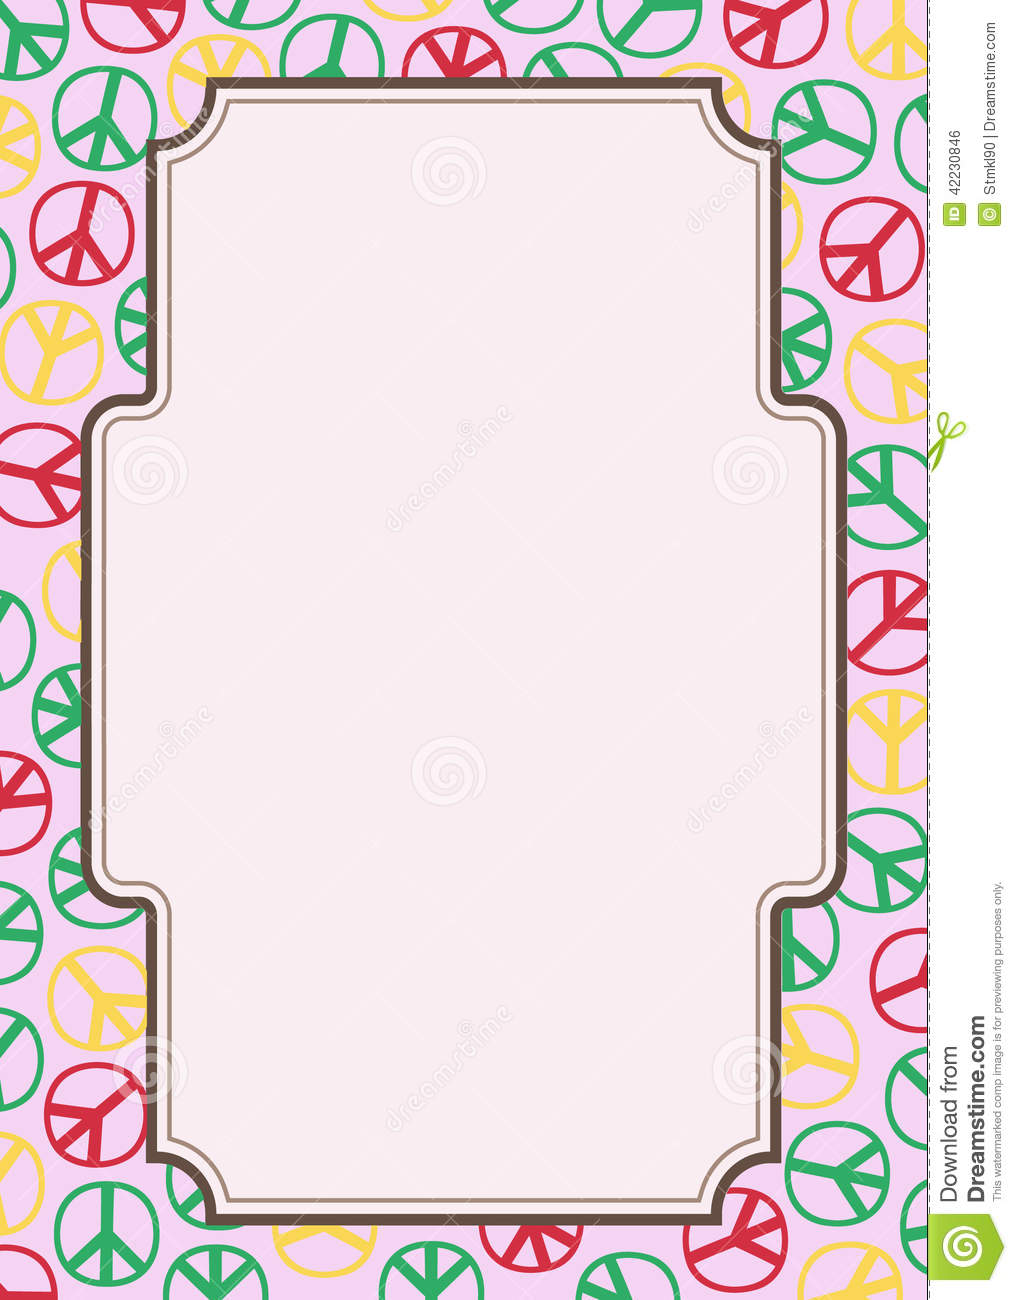     Hippie Frame    Ign Of Peace And Pacifism Symbol Of The Hippie